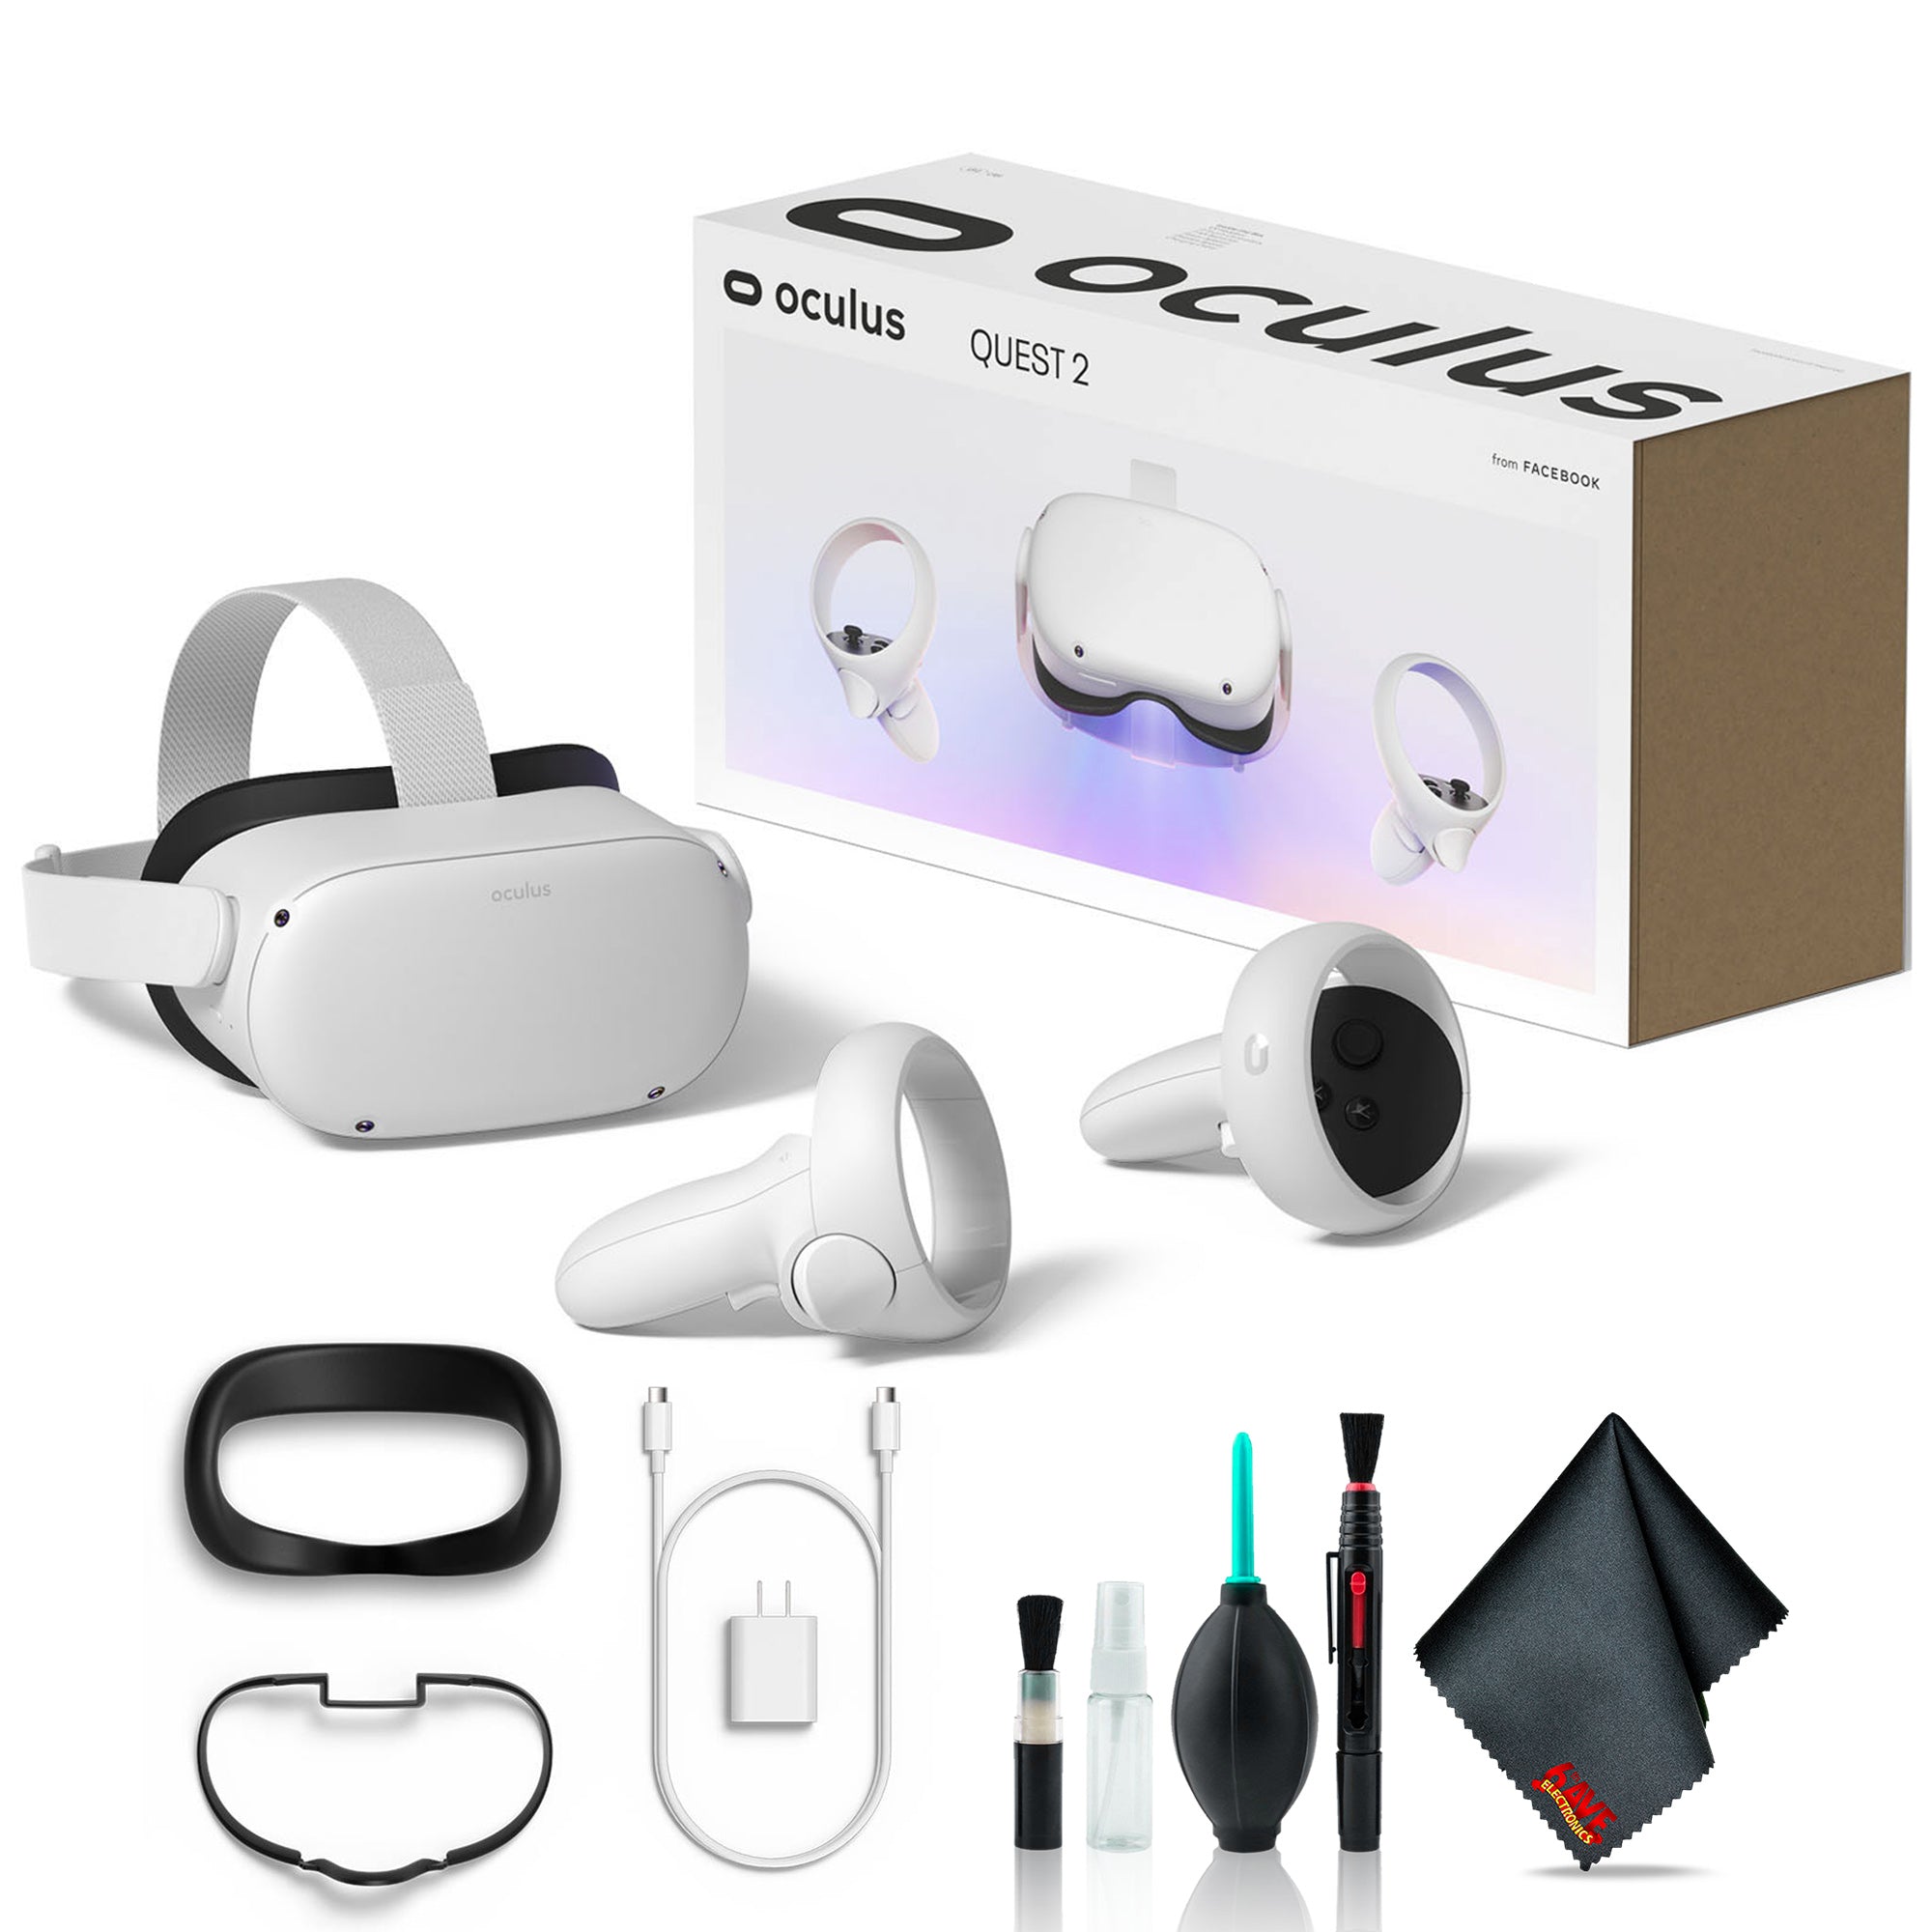 Meta Quest 2 Advanced VR Headset (128GB, White) Bundle with 6Ave Cleaning Kit